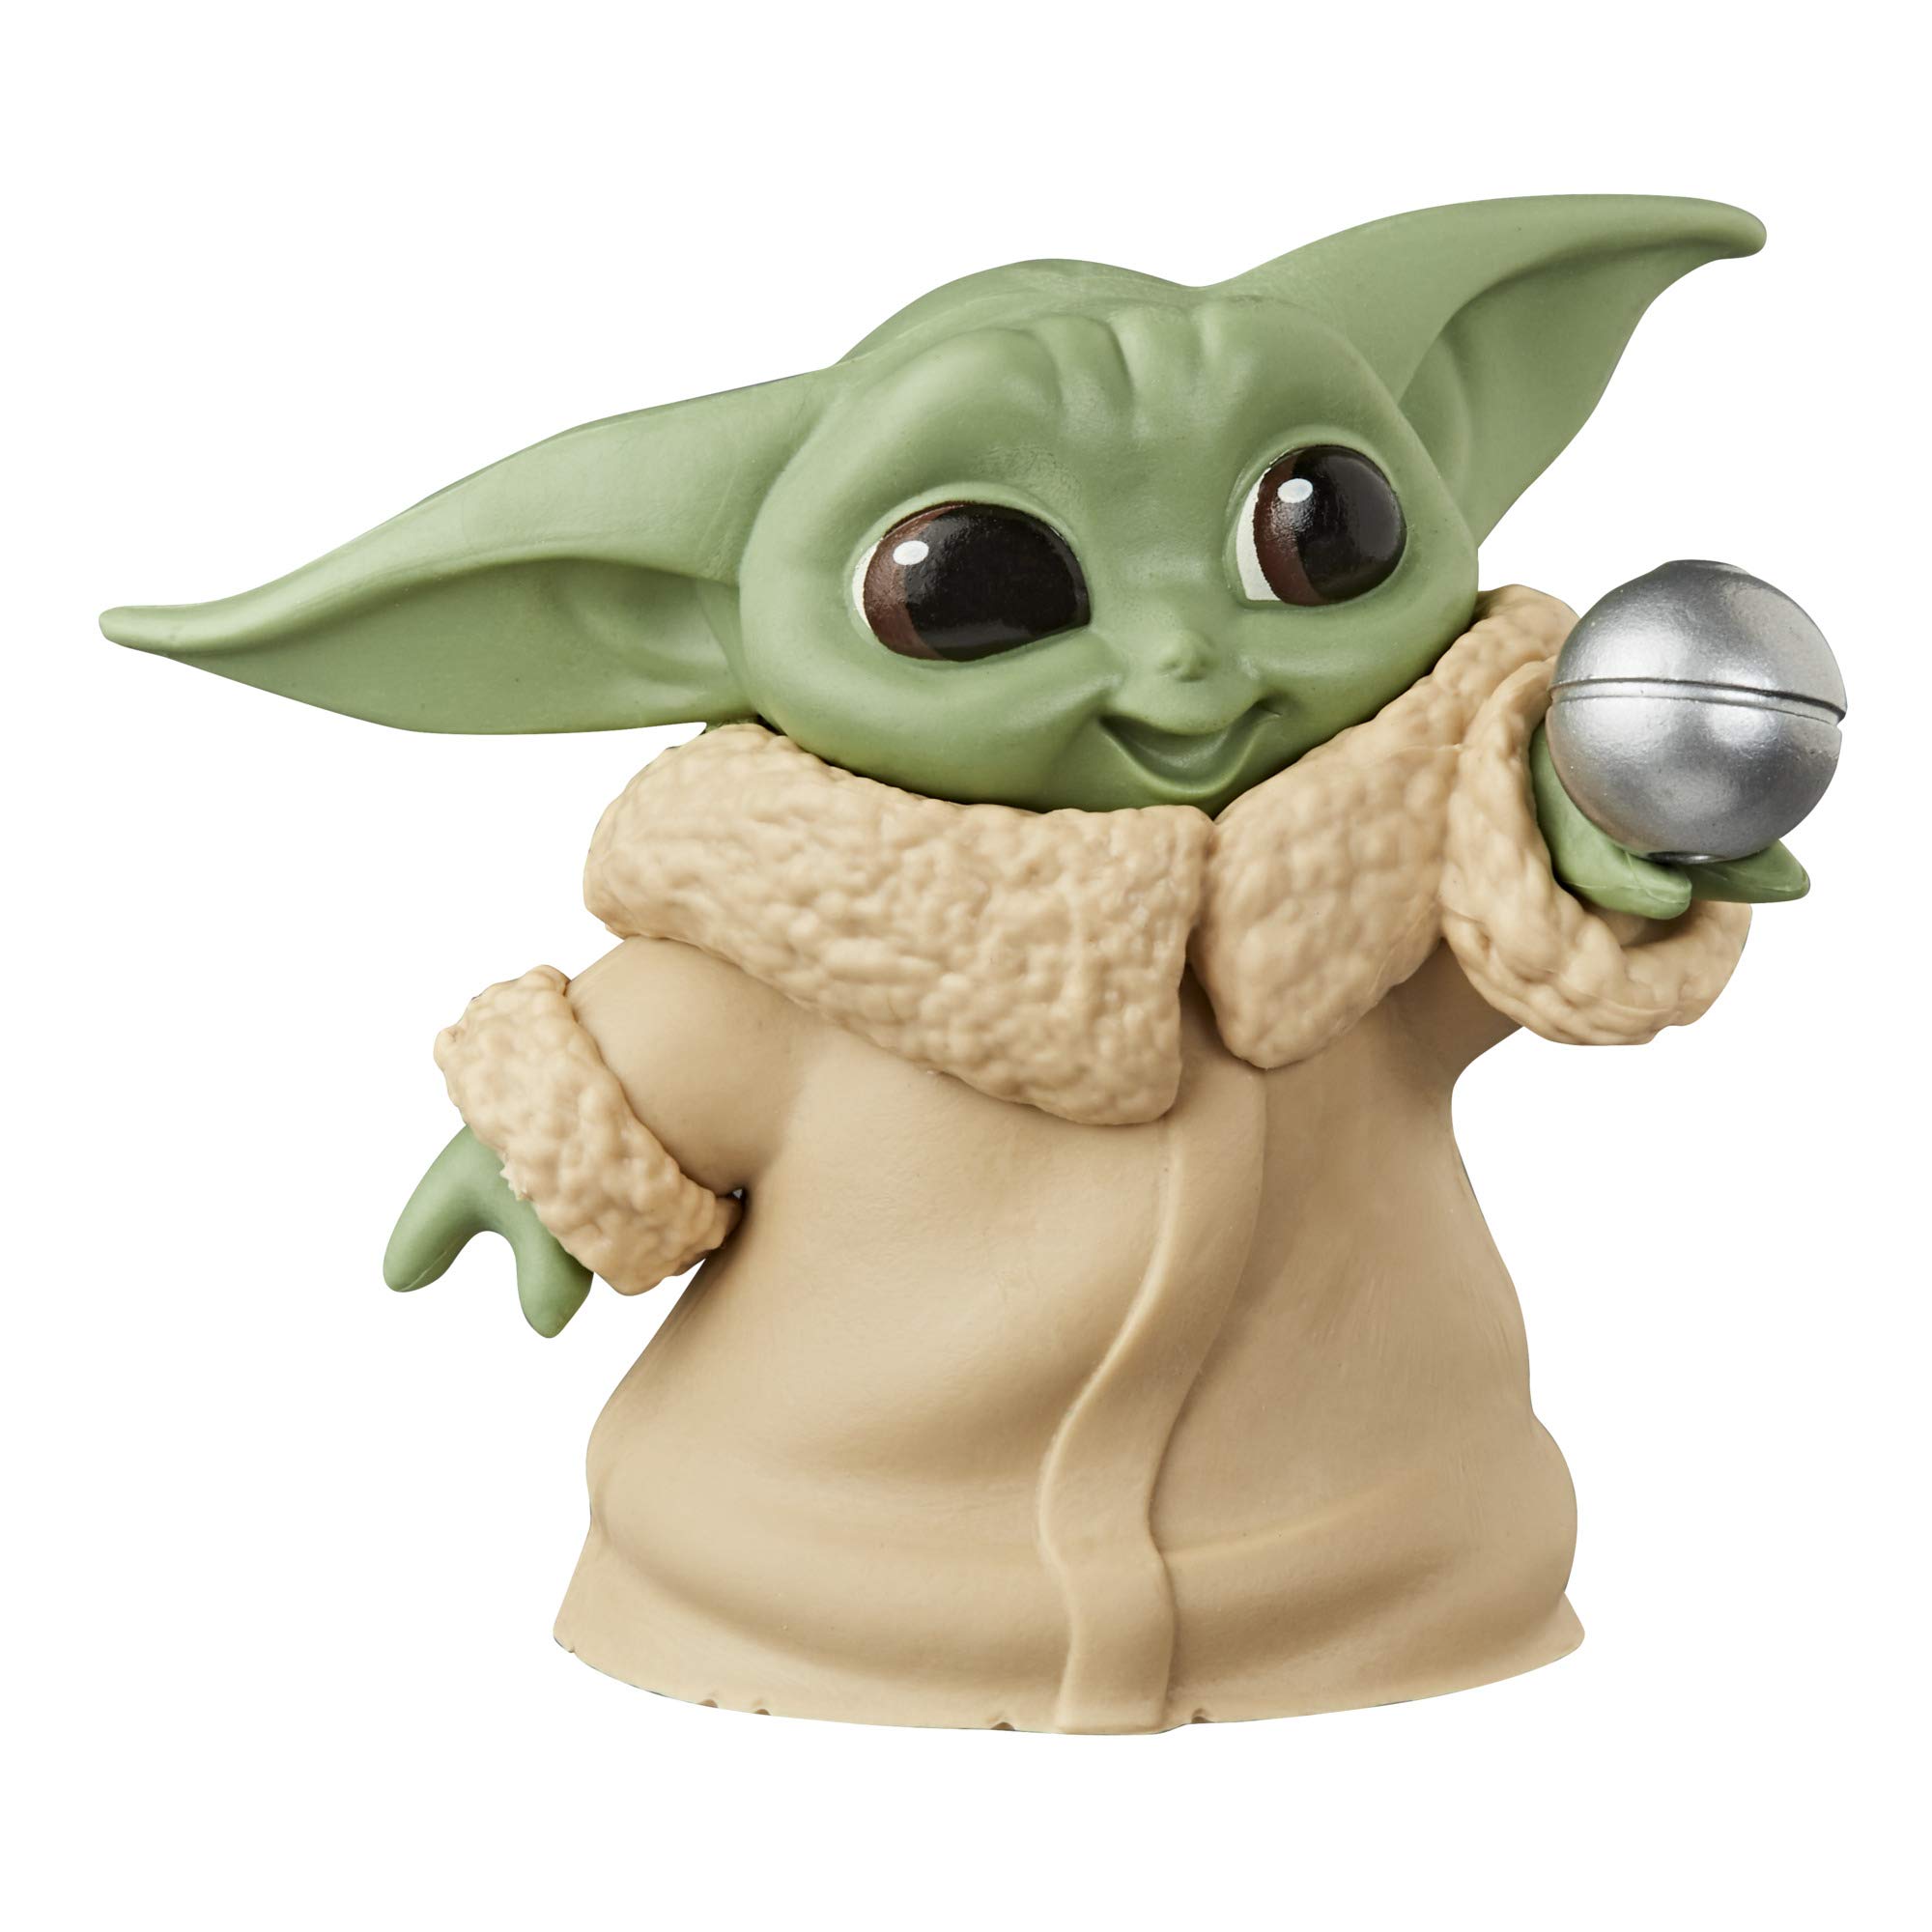 STAR WARS The Bounty Collection The Child Collectible Toys 2.2-Inch The Mandalorian “Baby Yoda” Don’t Leave, Ball Toy Figure 2-Pack